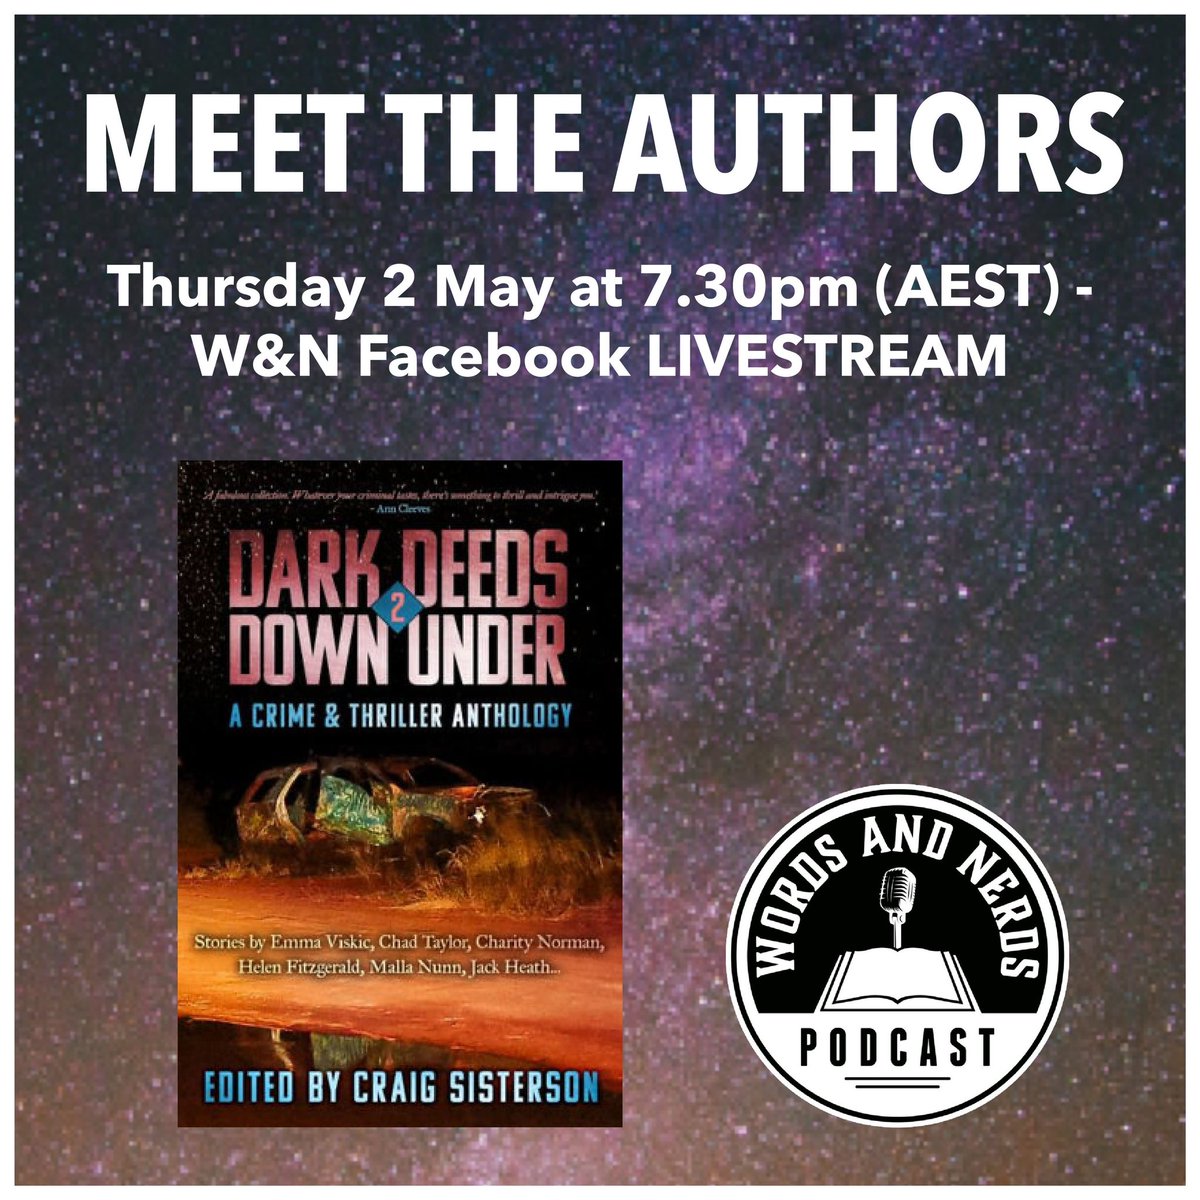 Kia ora booklovers! Meet many of the authors involved with our new anthology #DarkDeedsDownUnder2 at an online launch celebration and livestream tomorrow, 7.30pm Sydney/Melb, 9.30pm New Zealand, 10.30am UK time. Would love to 'see' you there. Tune in here: facebook.com/events/7449312…